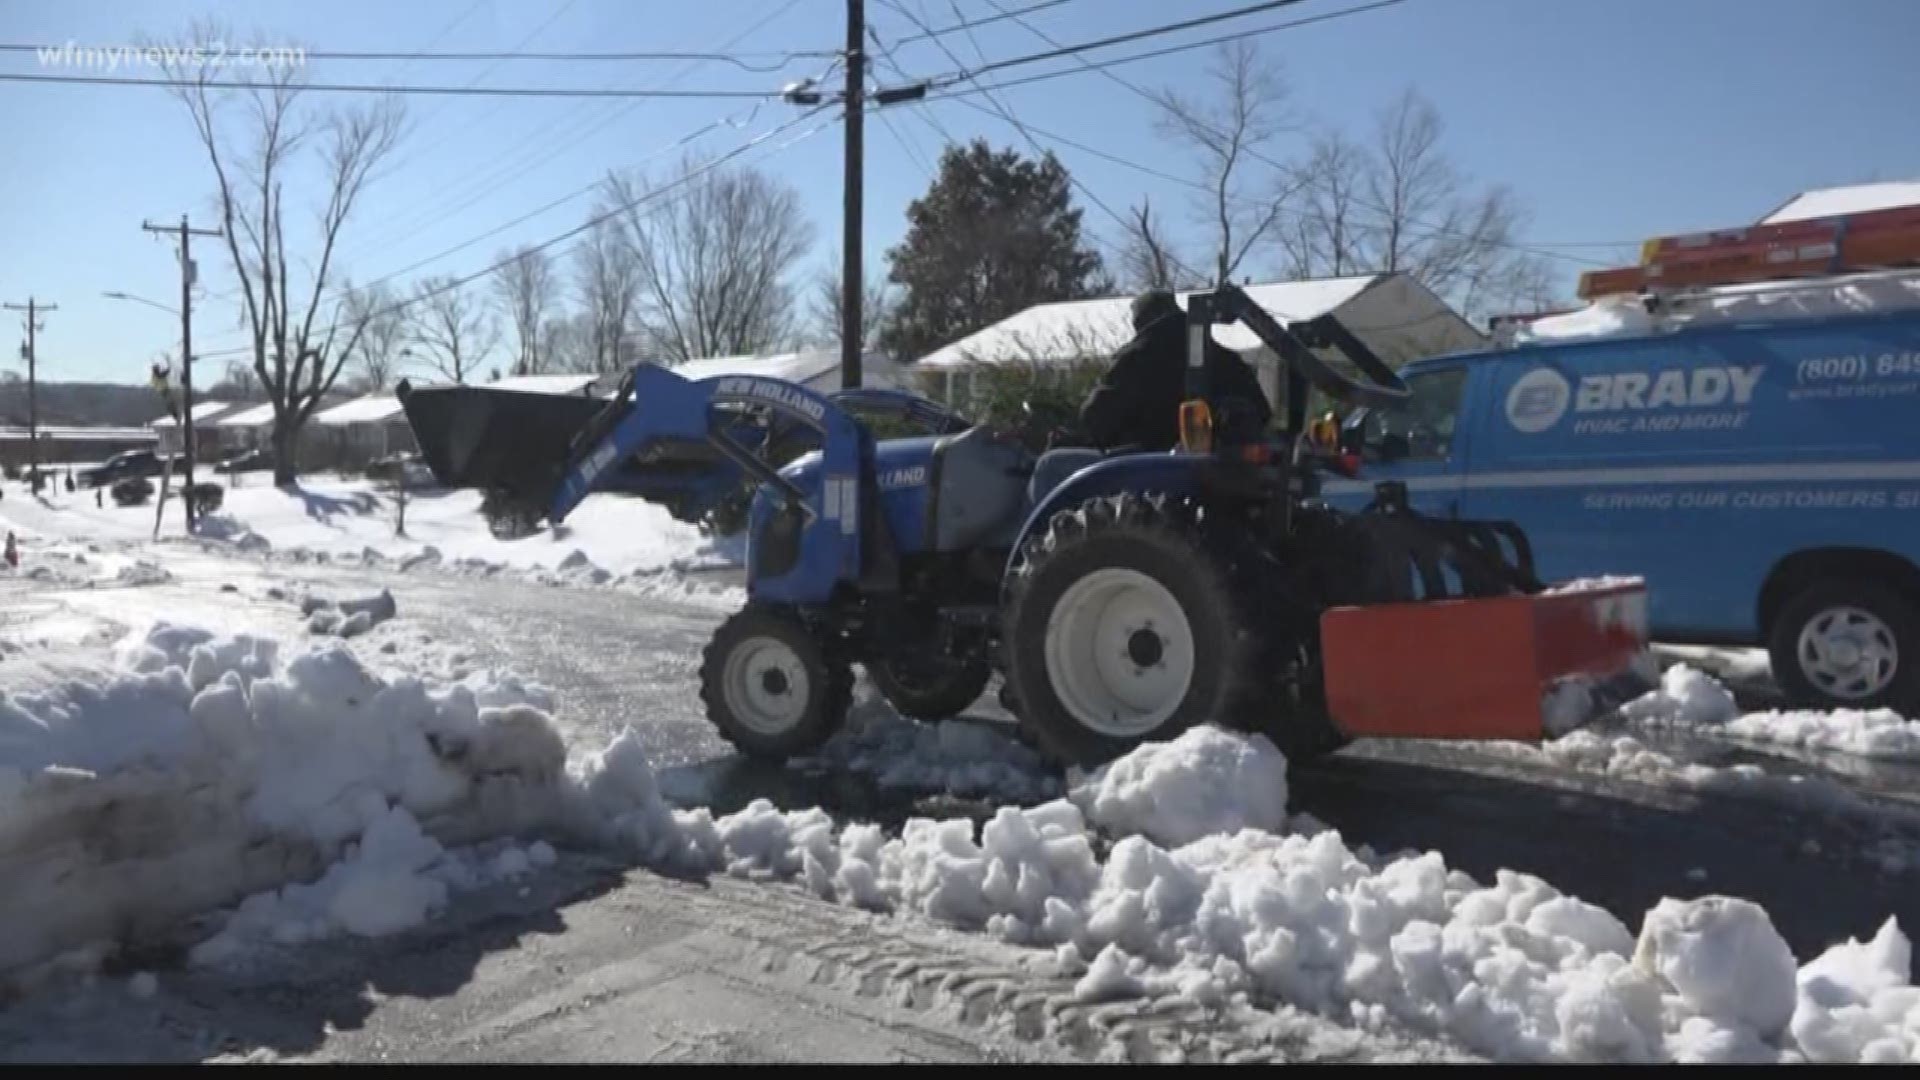 We showed you Greensboro neighborhood that has weathered every major storm this year from the tornado, to hurricanes, to the snow storm. Their neighborhood still hadn't been plowed. But one man in Randolph county saw our story and wanted to help.